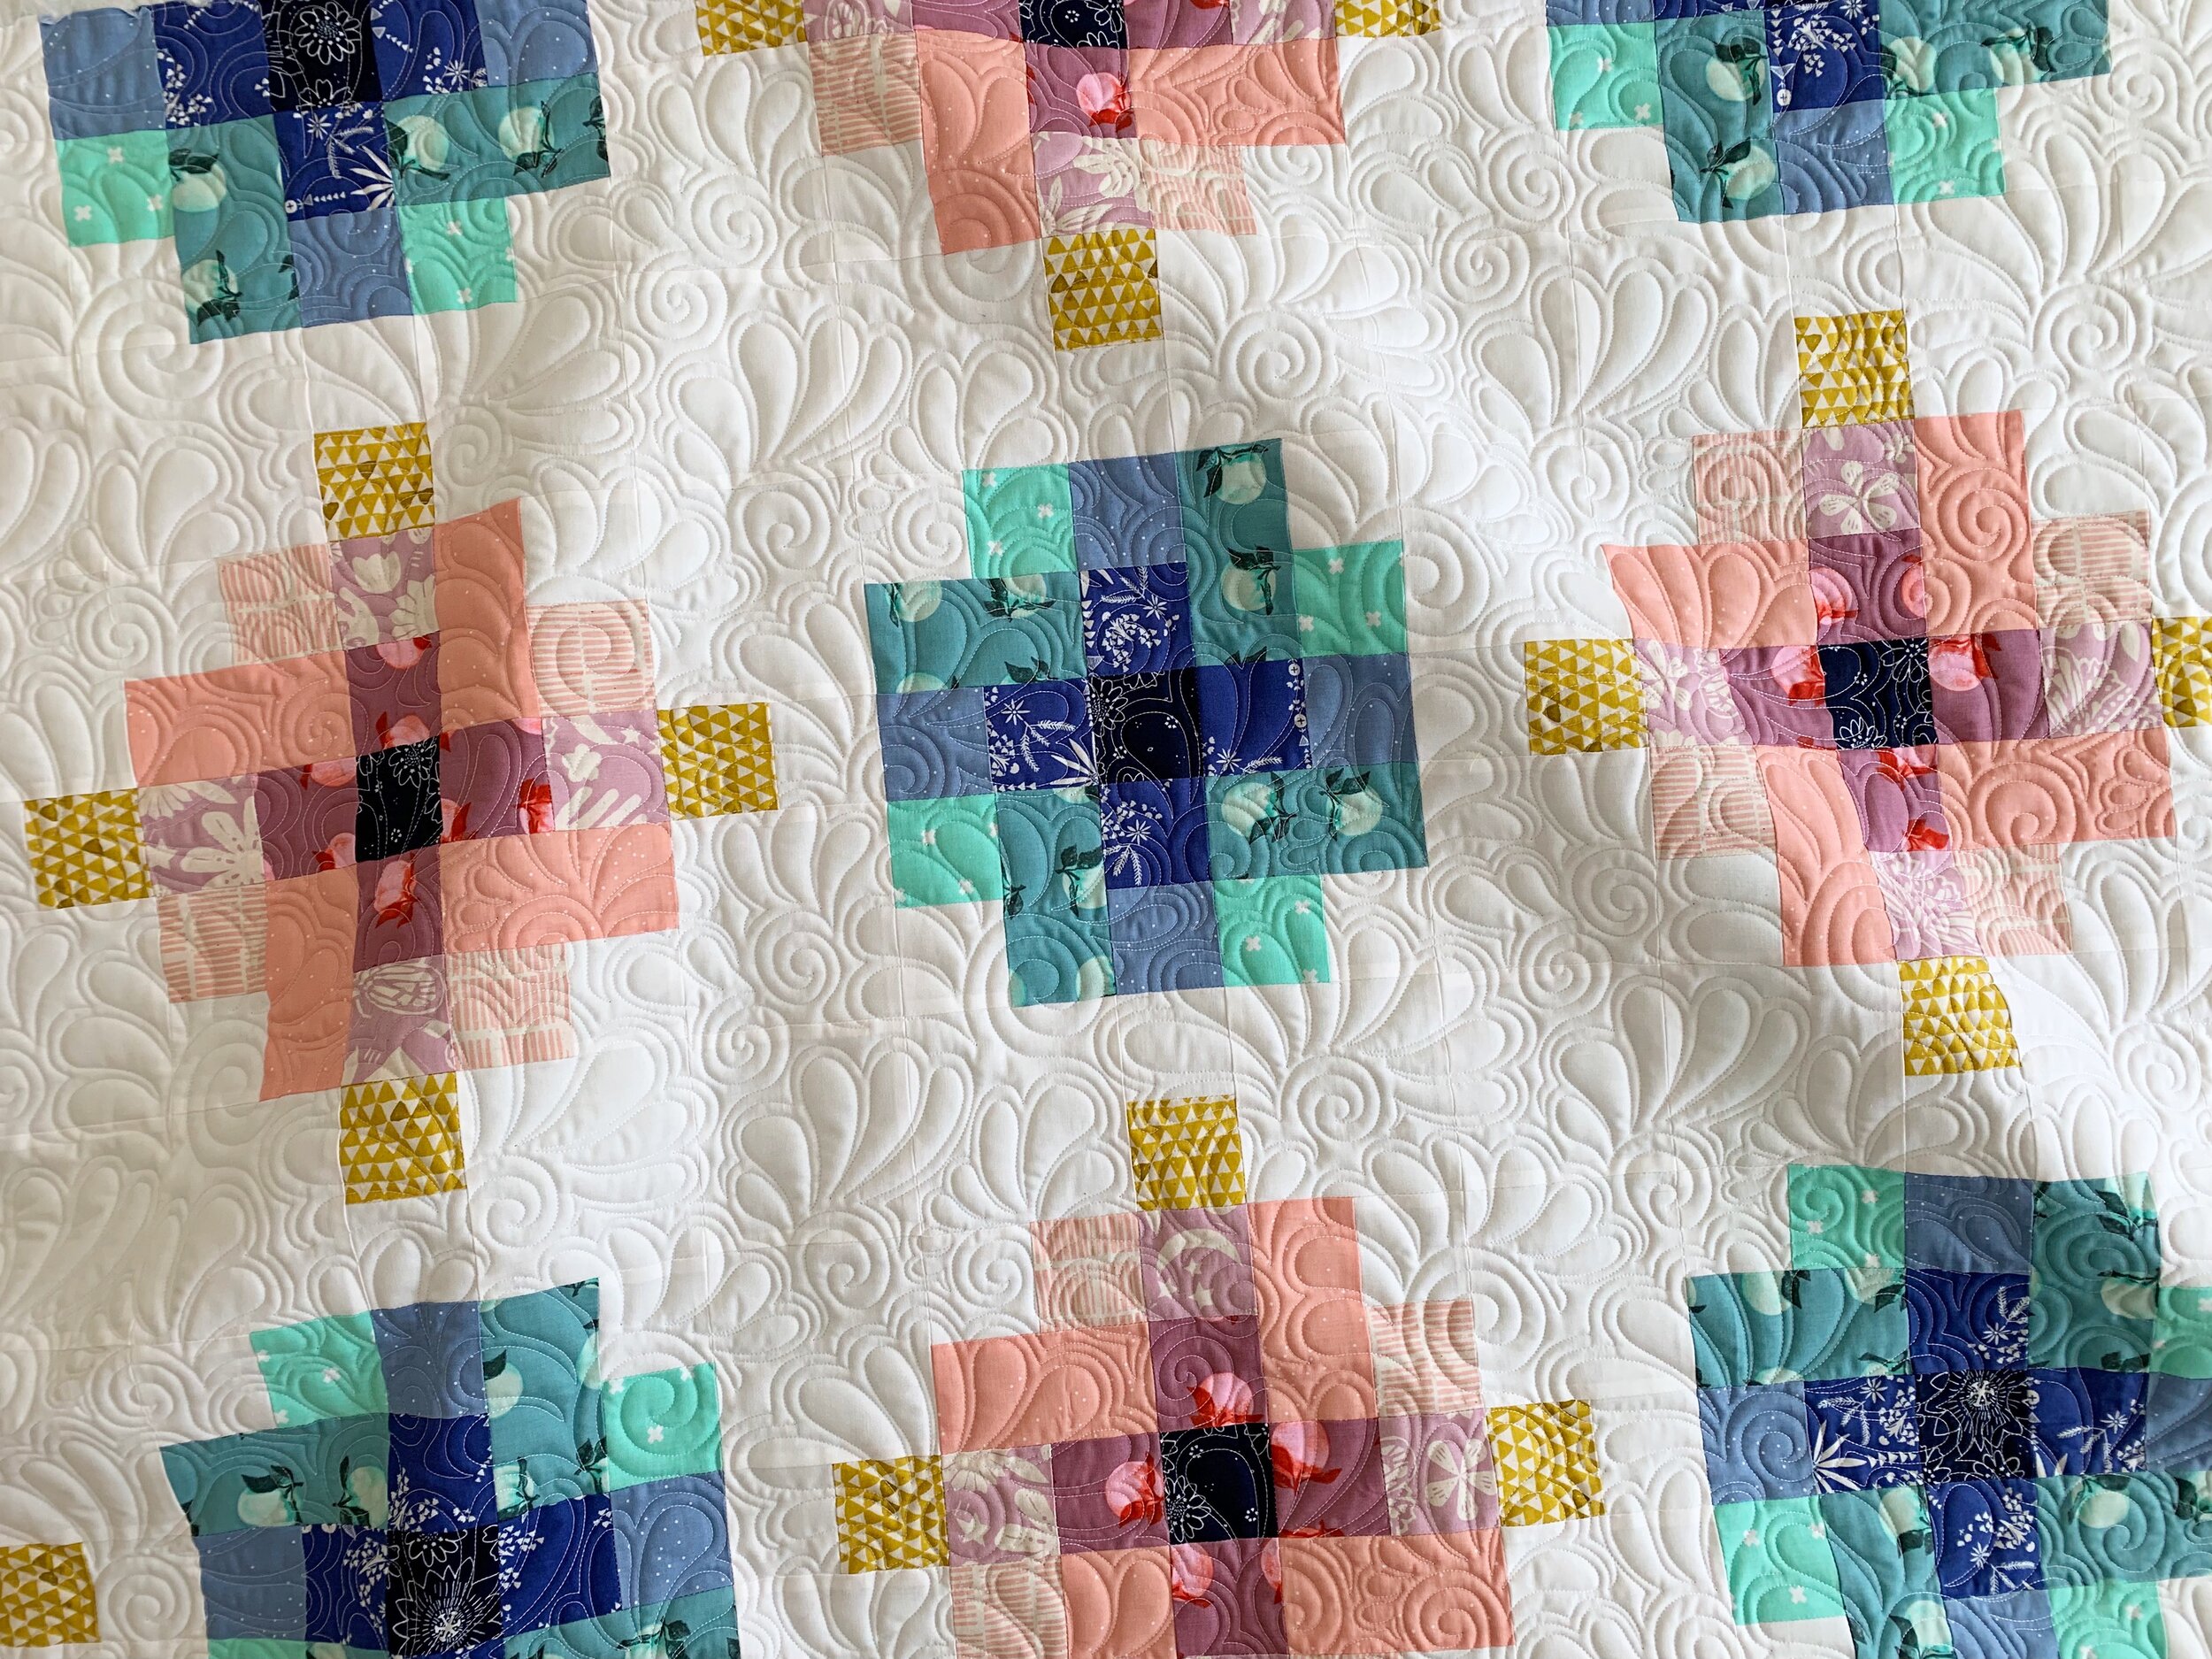 Gallery — Stitch Mode Quilts